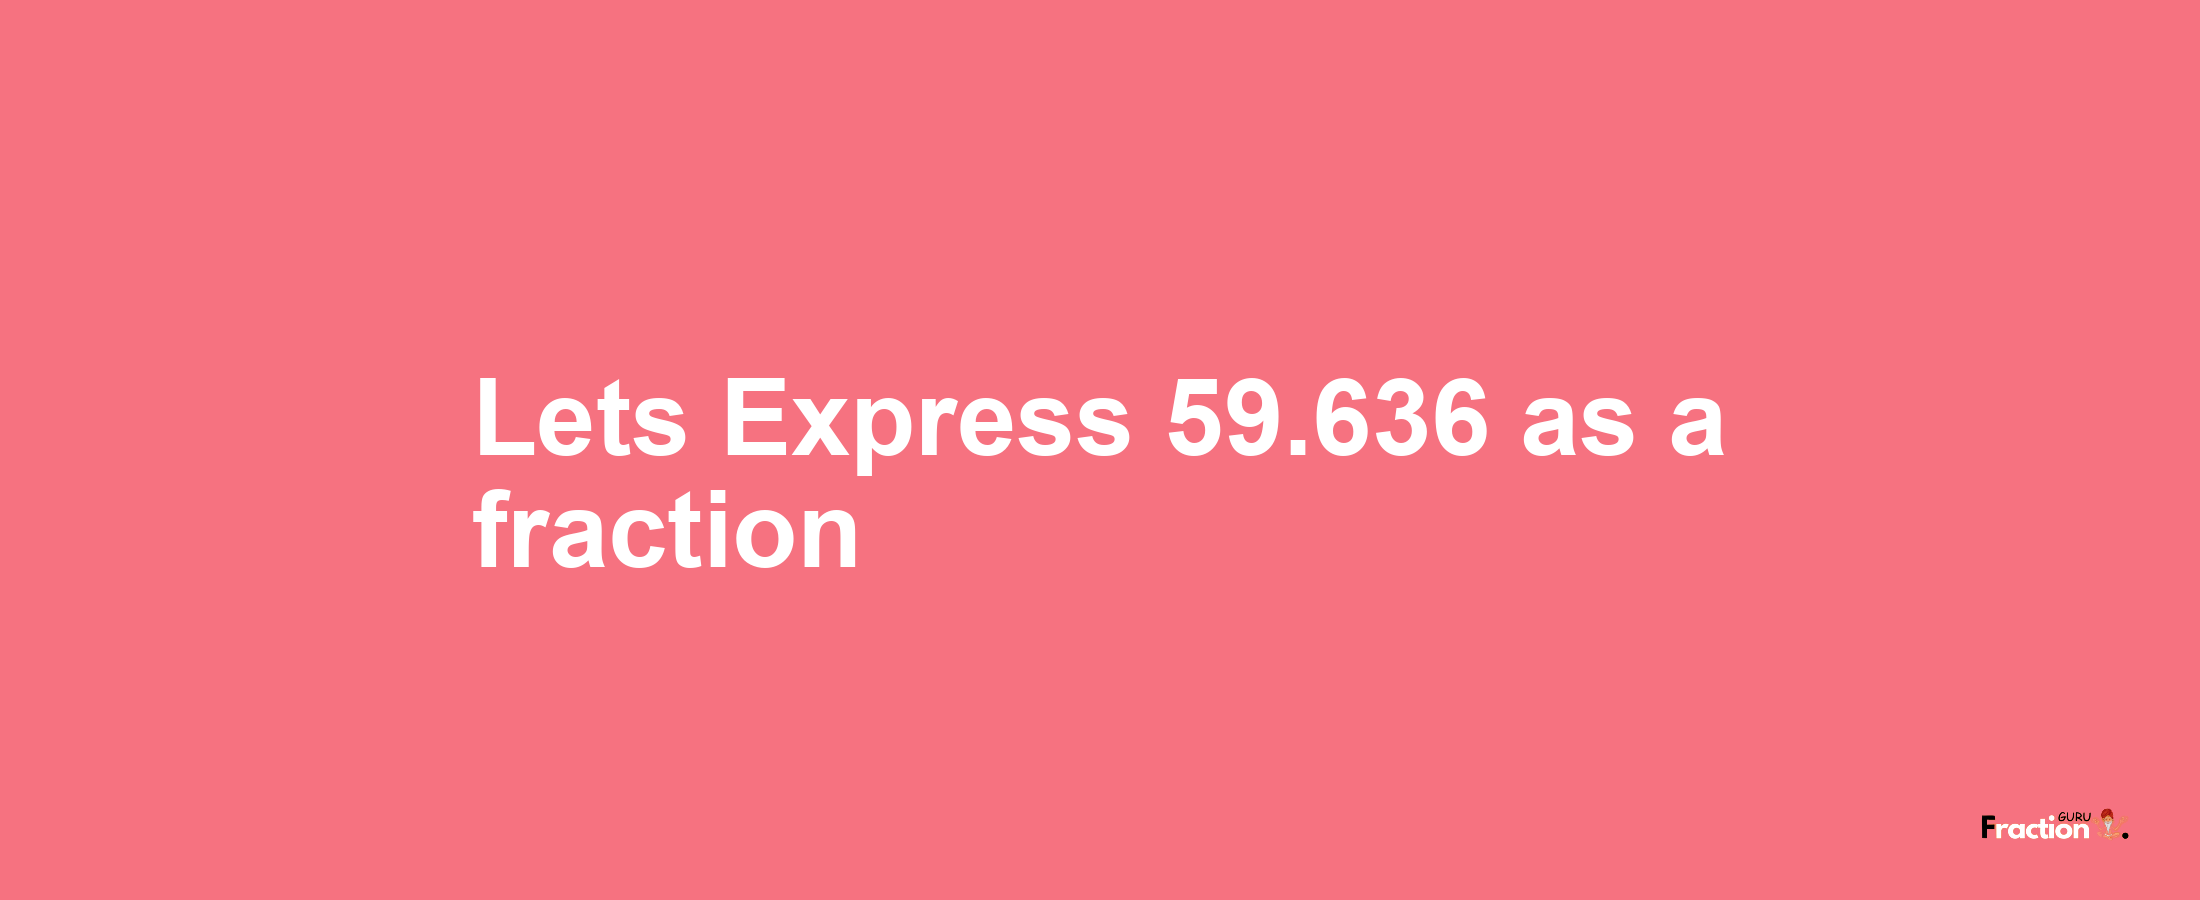 Lets Express 59.636 as afraction